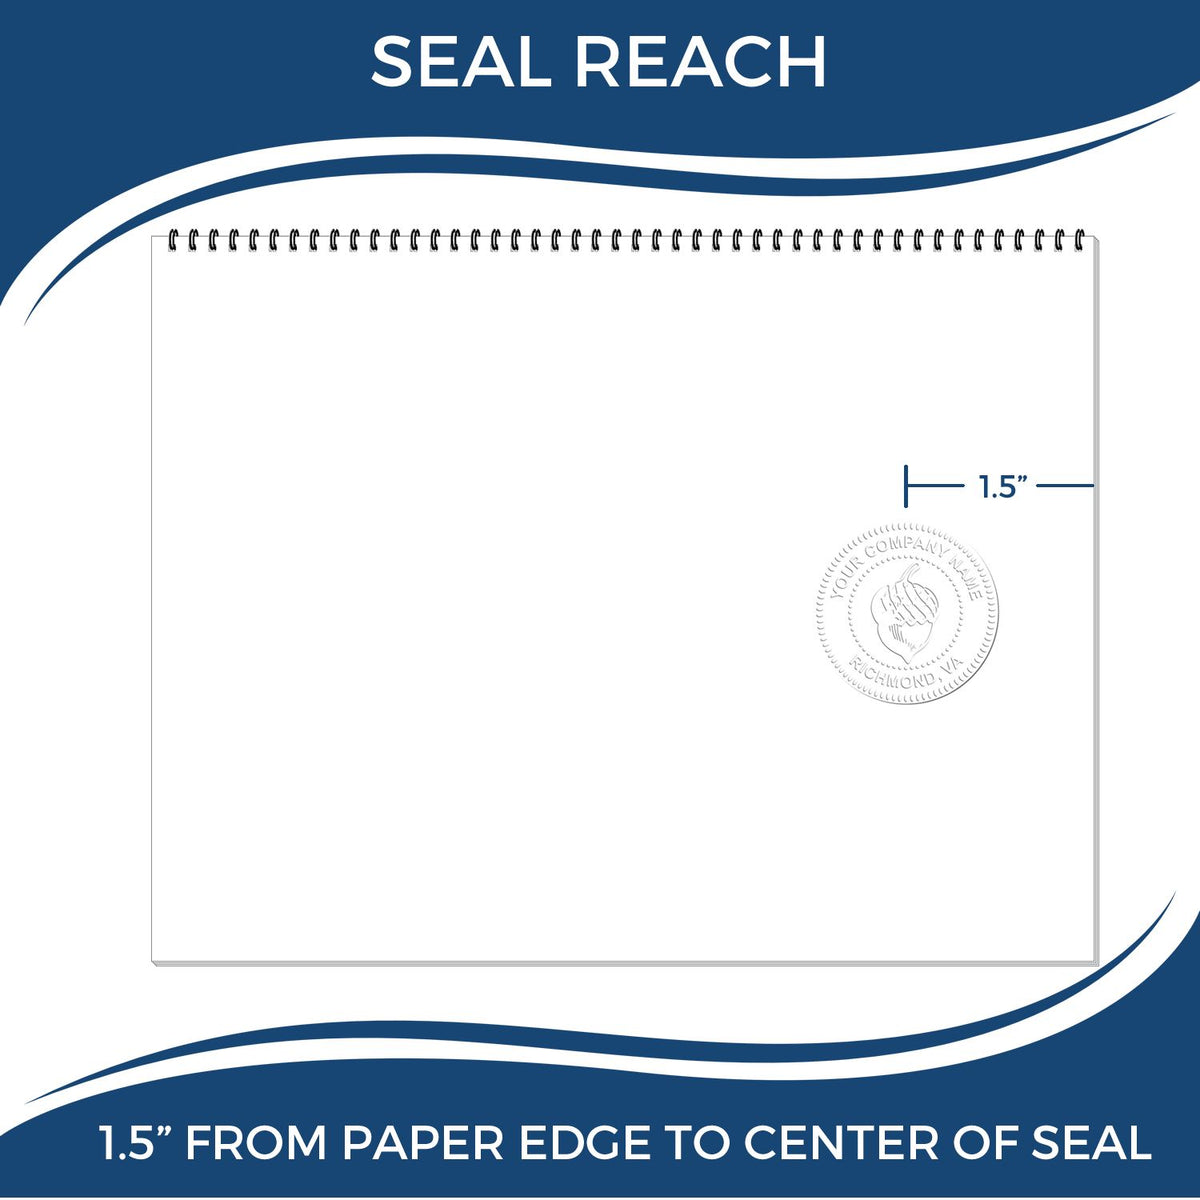 An infographic showing the seal reach which is represented by a ruler and a miniature seal image of the Gift Florida Geologist Seal